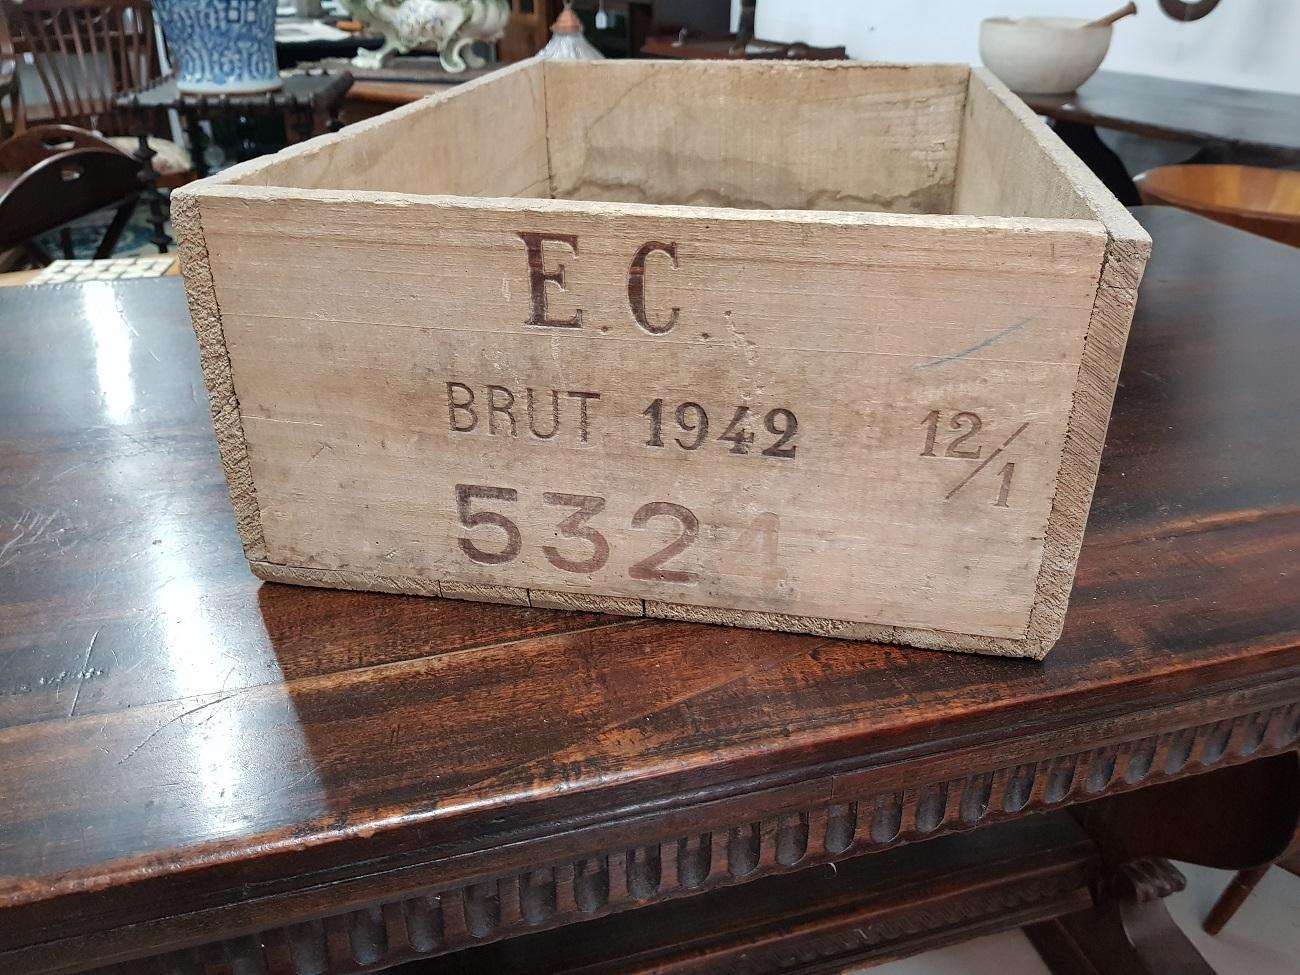 Old and beautiful used crate for Champagne from the company Veuve Clicquot-Ponsardin Reims-France Brut dated 1942 and it stored 12 bottles.

The measurements are,
Depth 38 cm/ 14.9 inch.
Width 54 cm/ 21.2 inch.
Height 19 cm/ 7.4 inch.
 